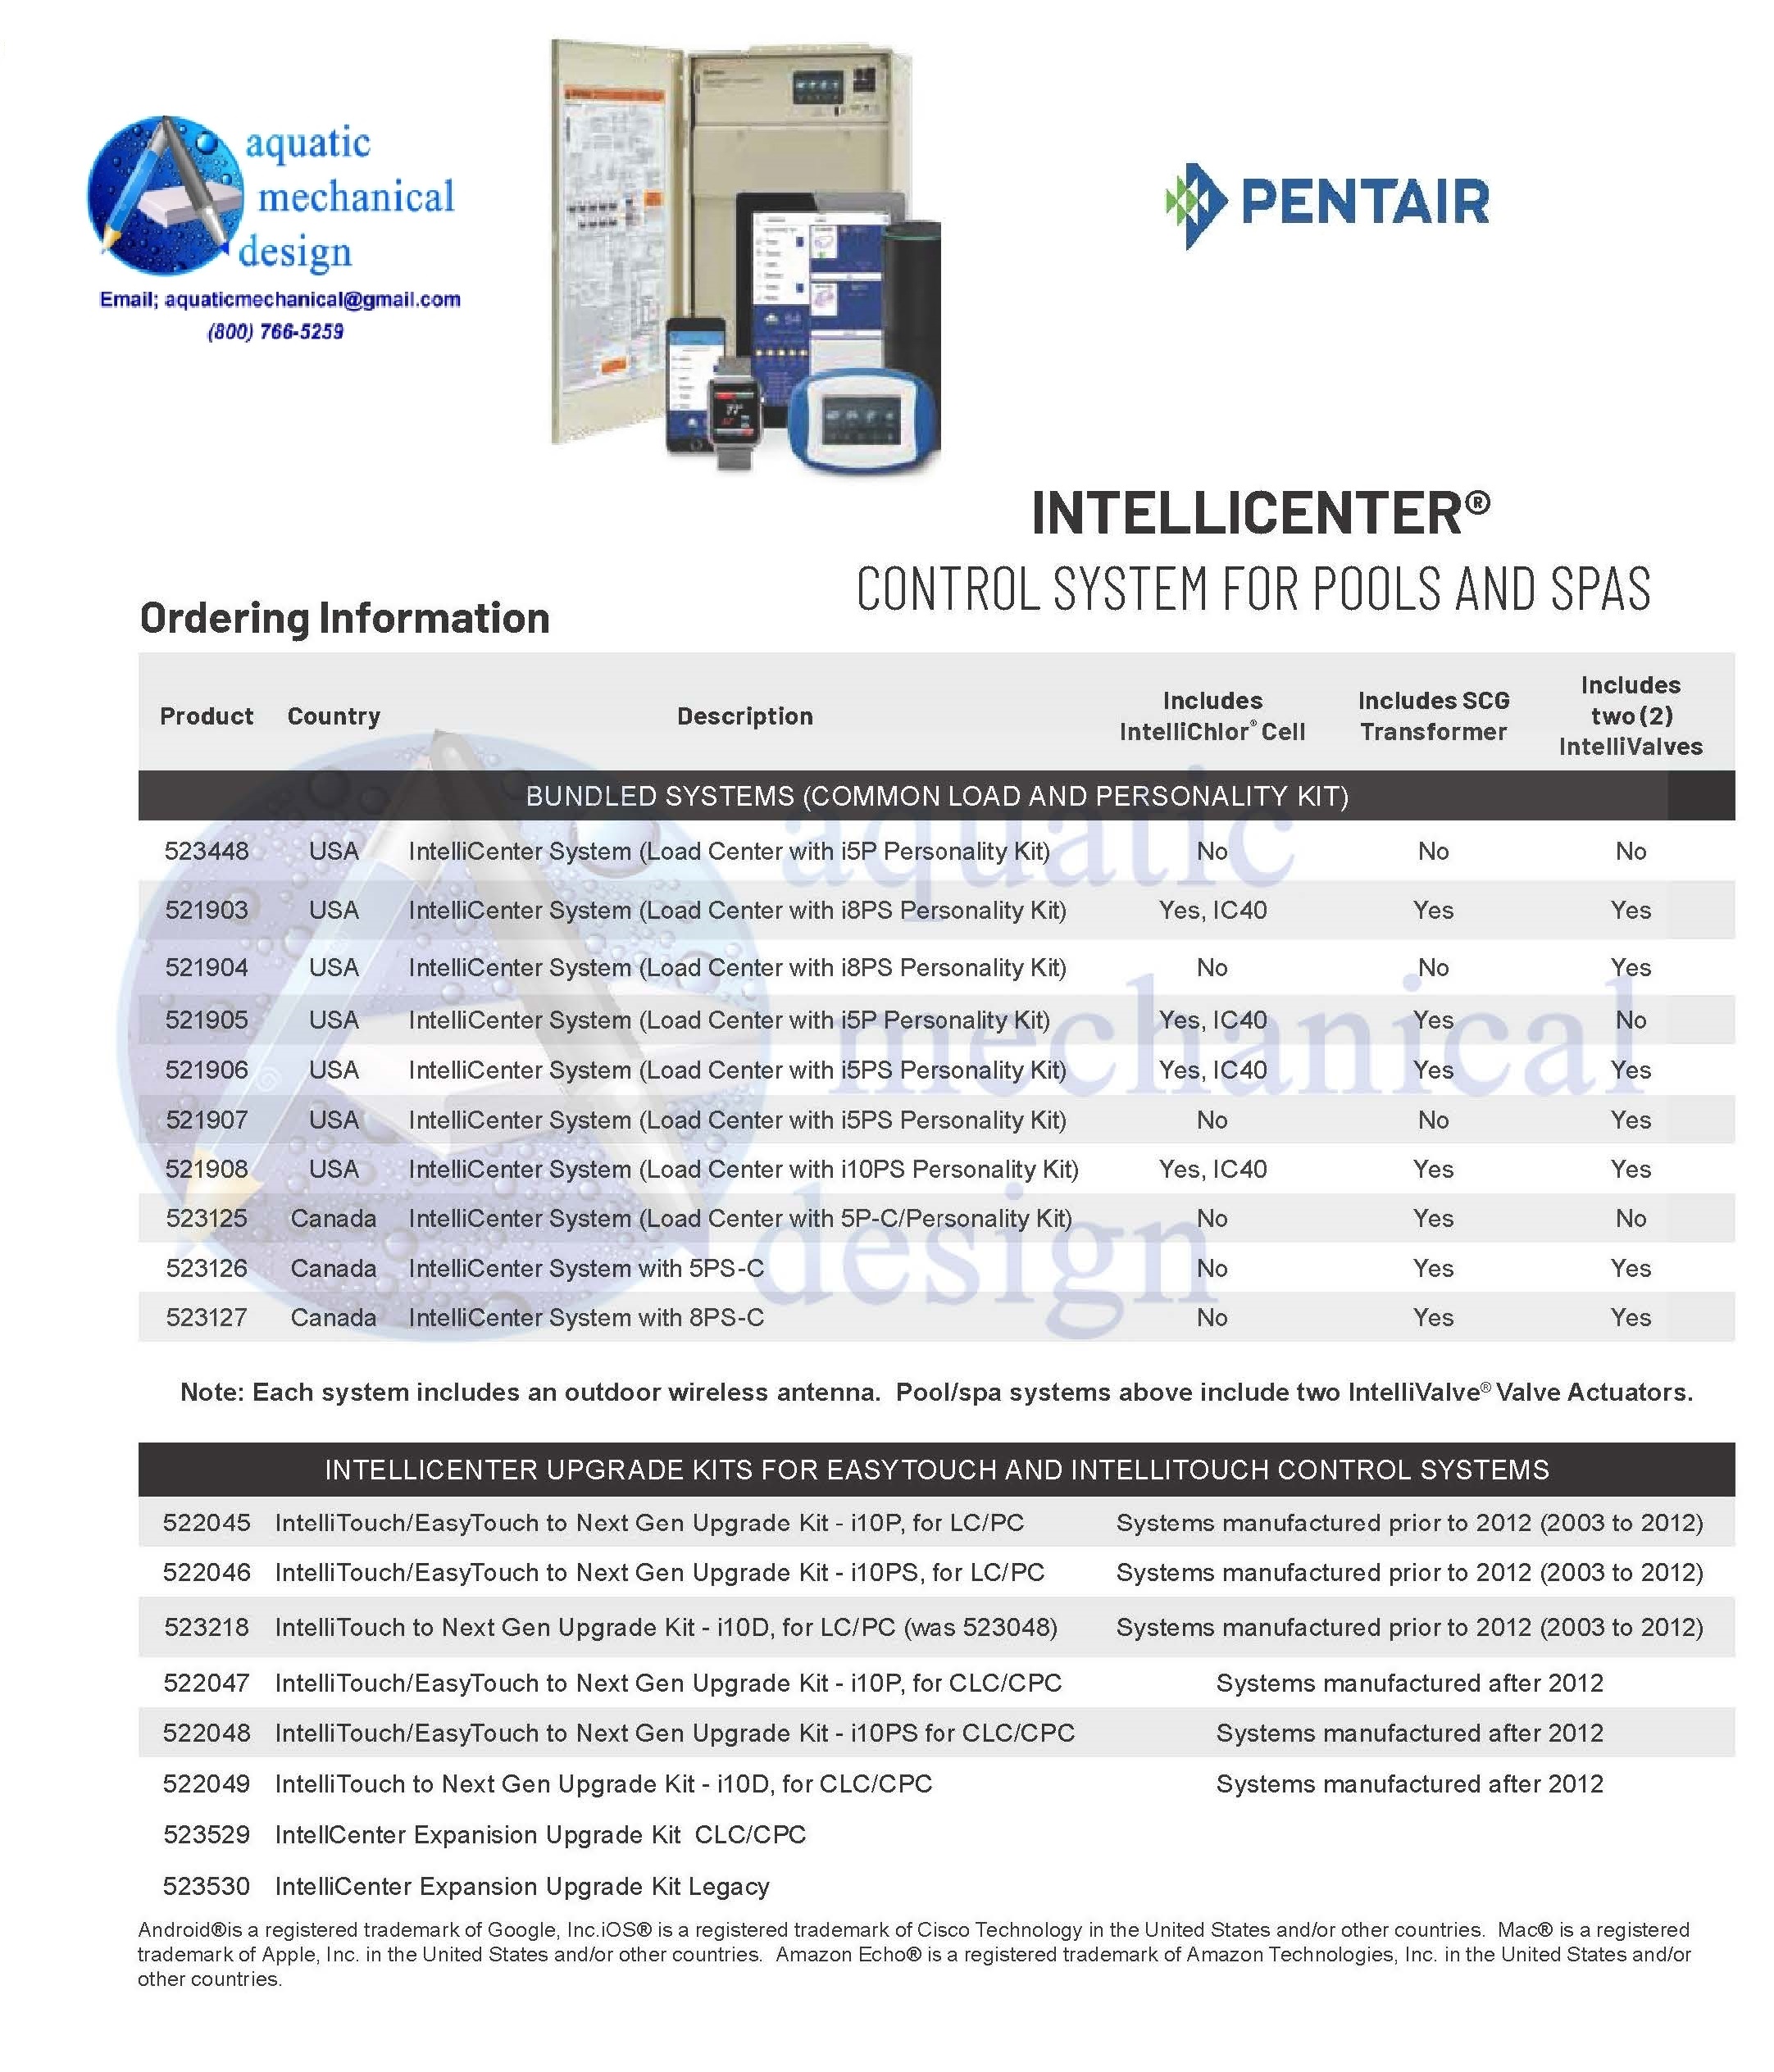 Pentair-Automation System - IntelliCenter